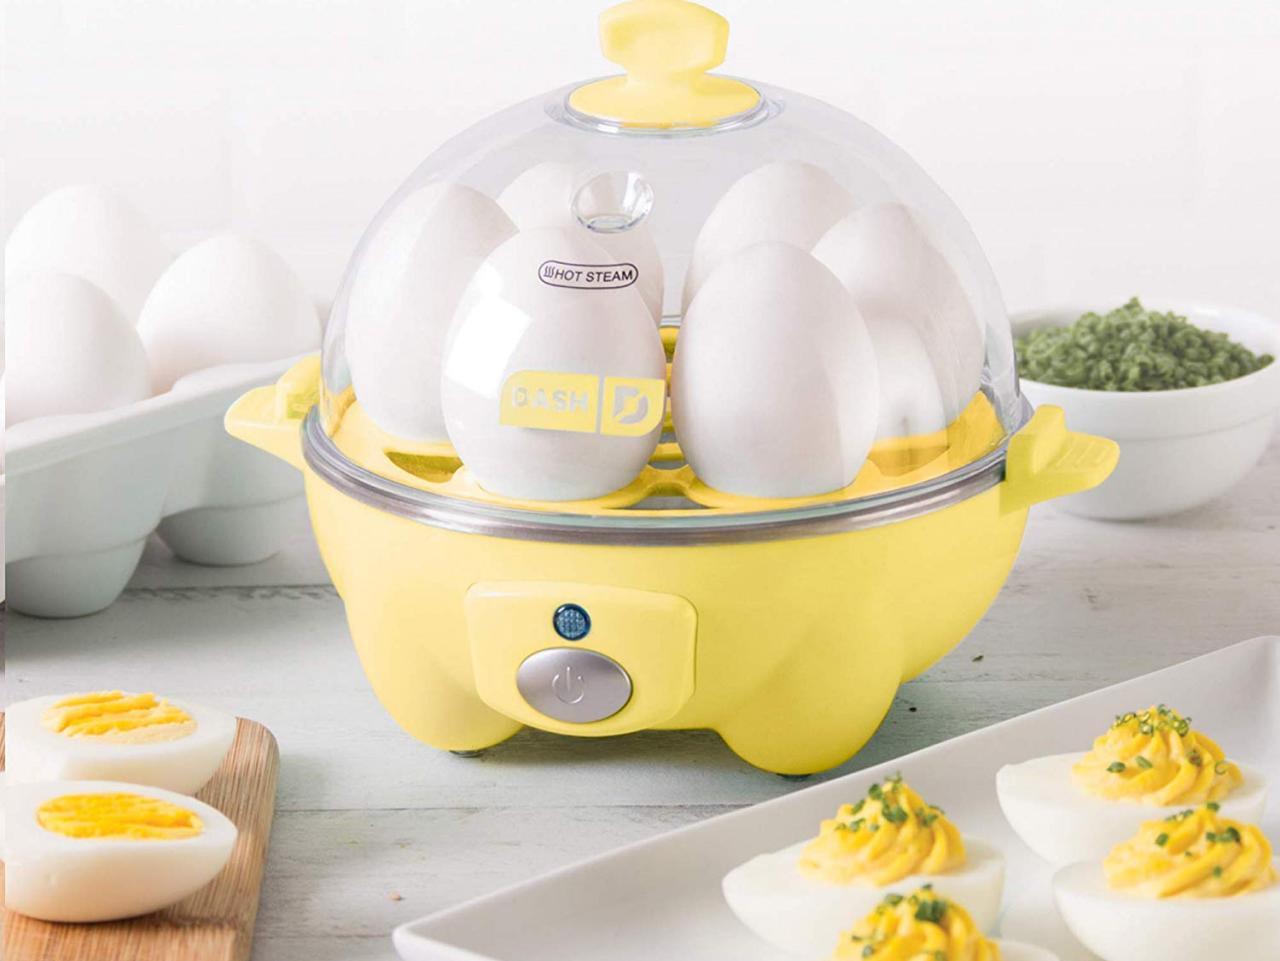 The Easy Egg Cooker is a great helper when you need to both cook